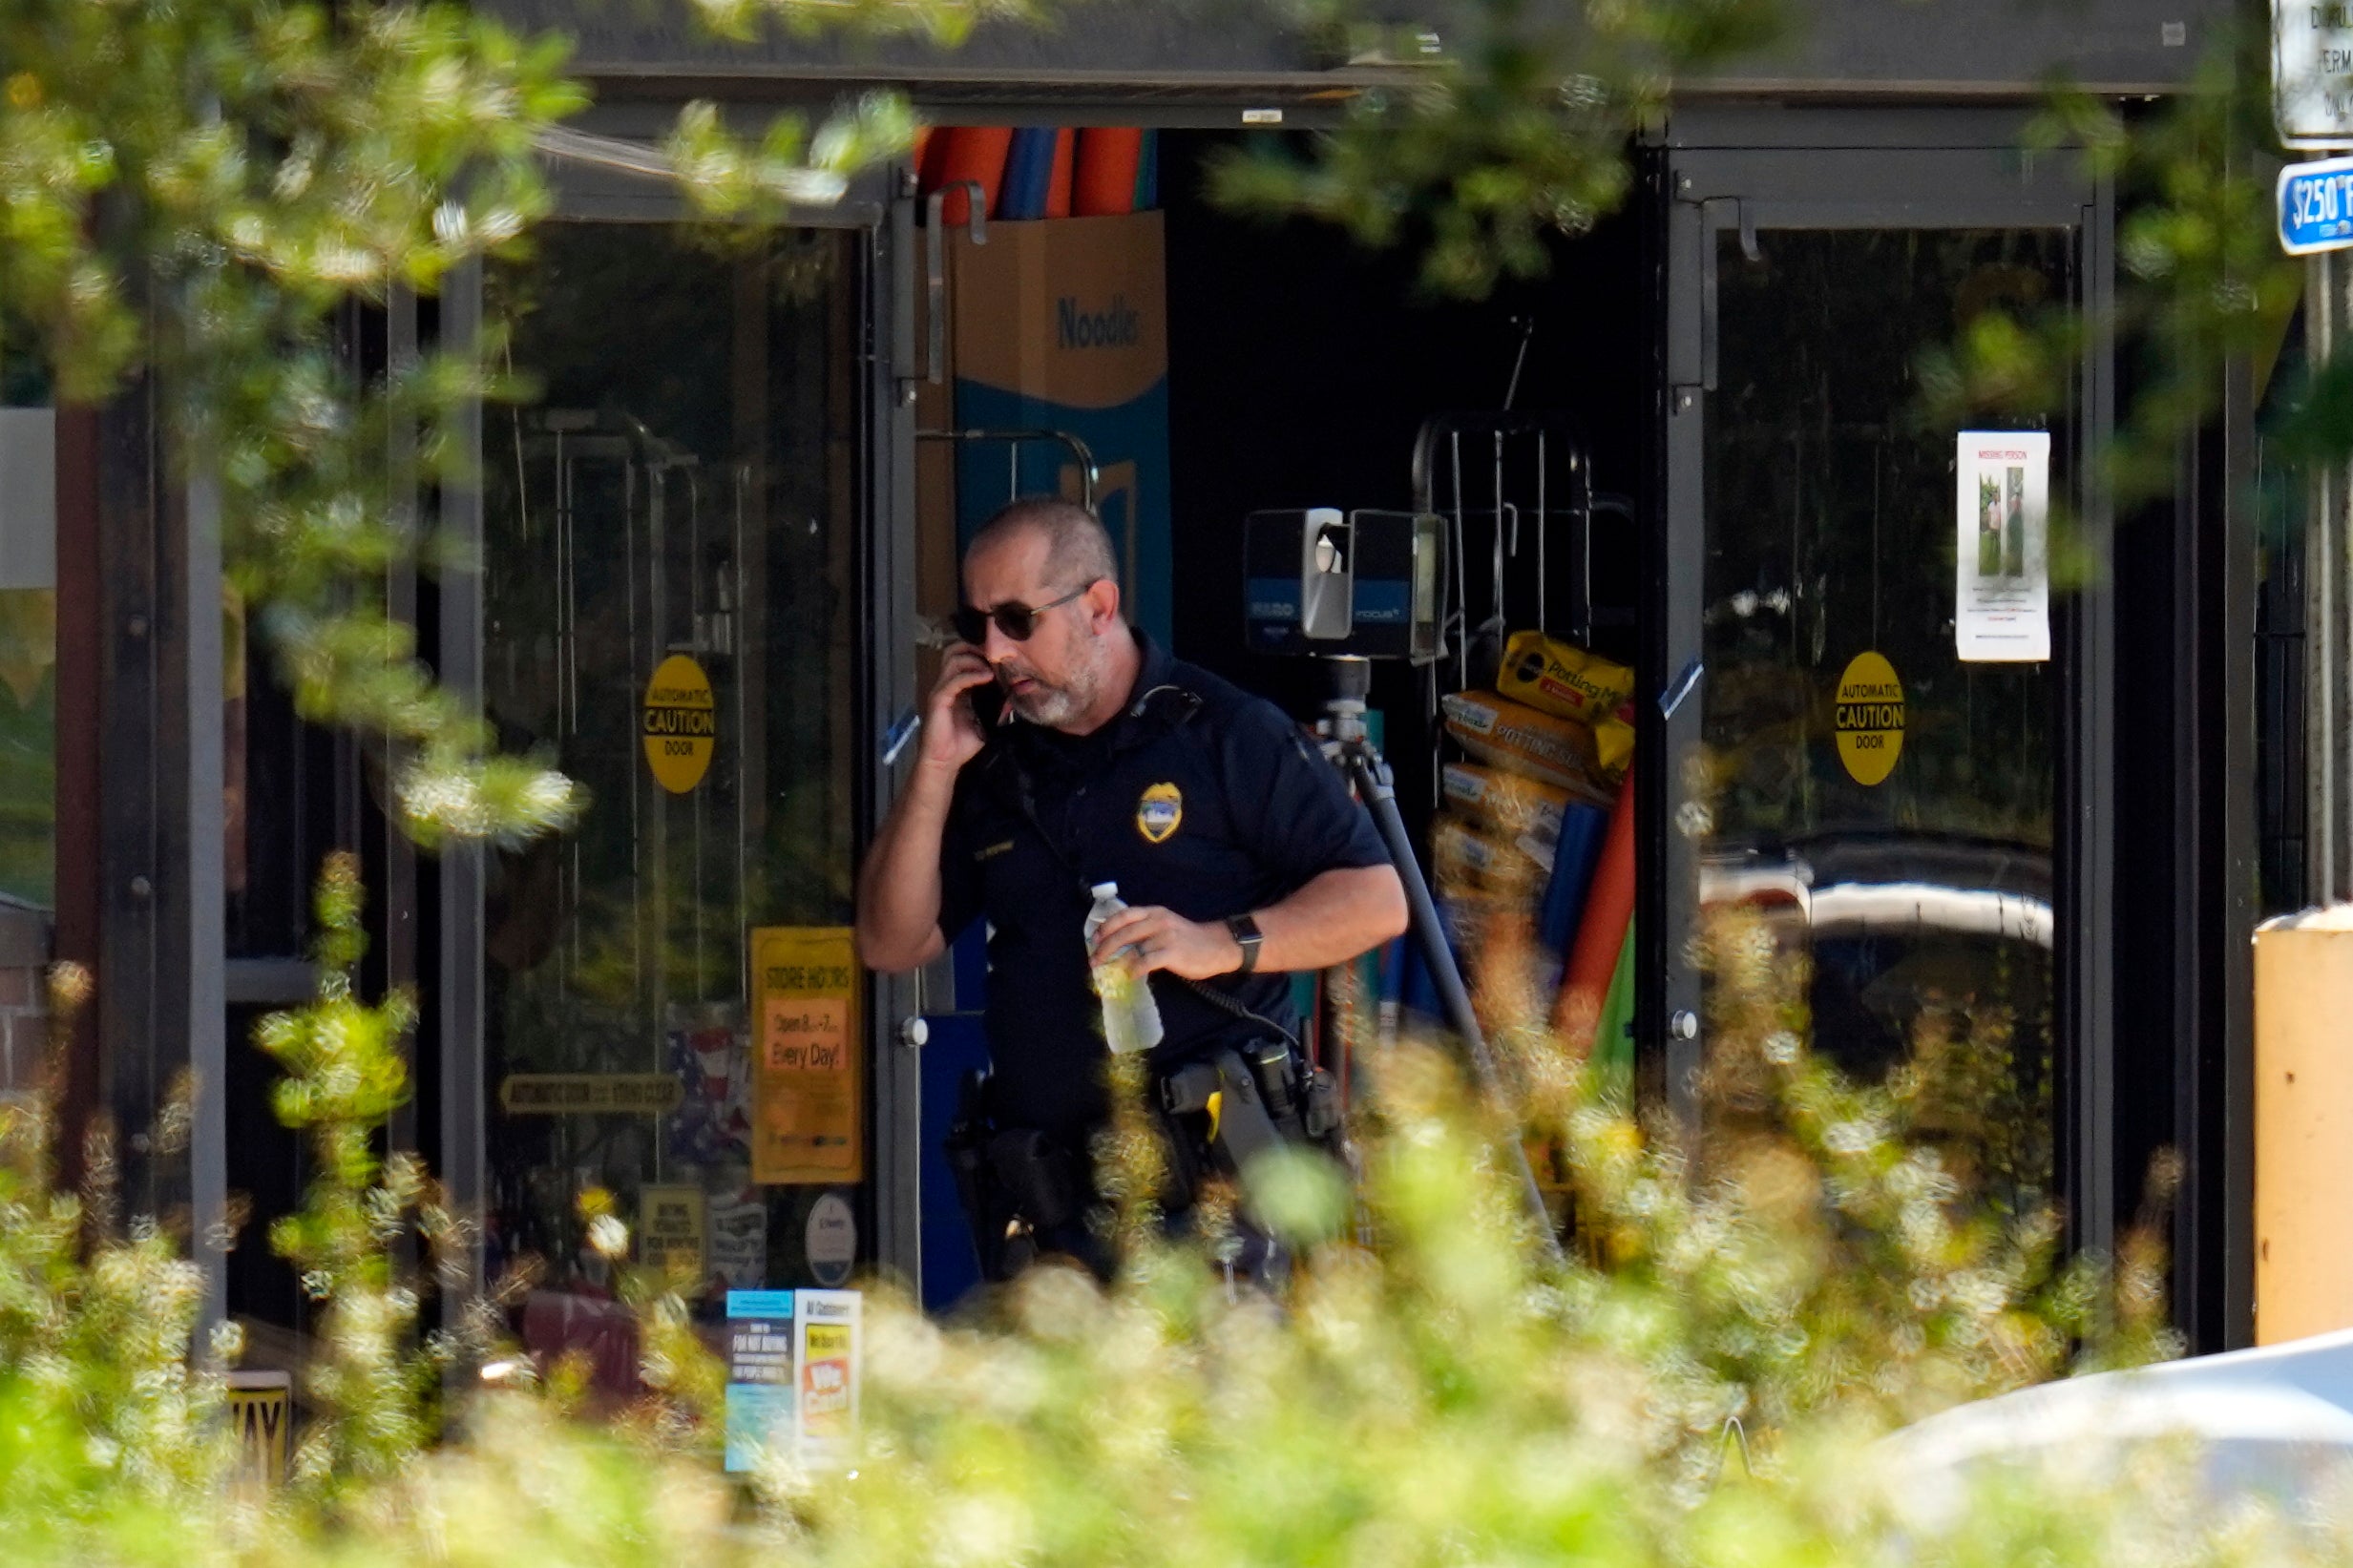 Law enforcement officials seen investigating at a Dollar General Store in Jacksonville, Fla.